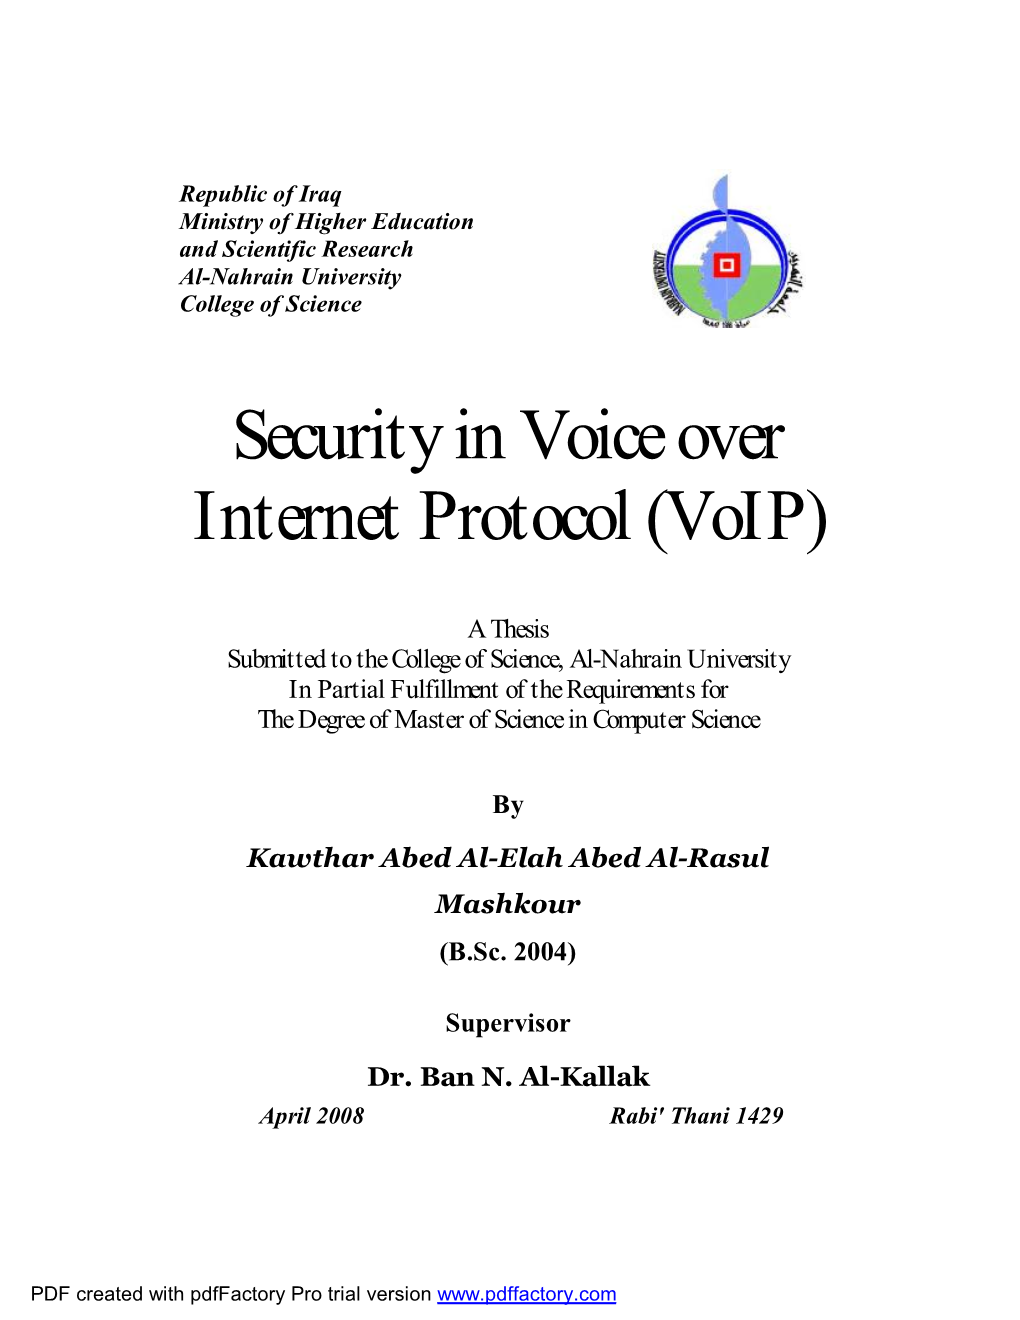 Security in Voice Over Internet Protocol (Voip)